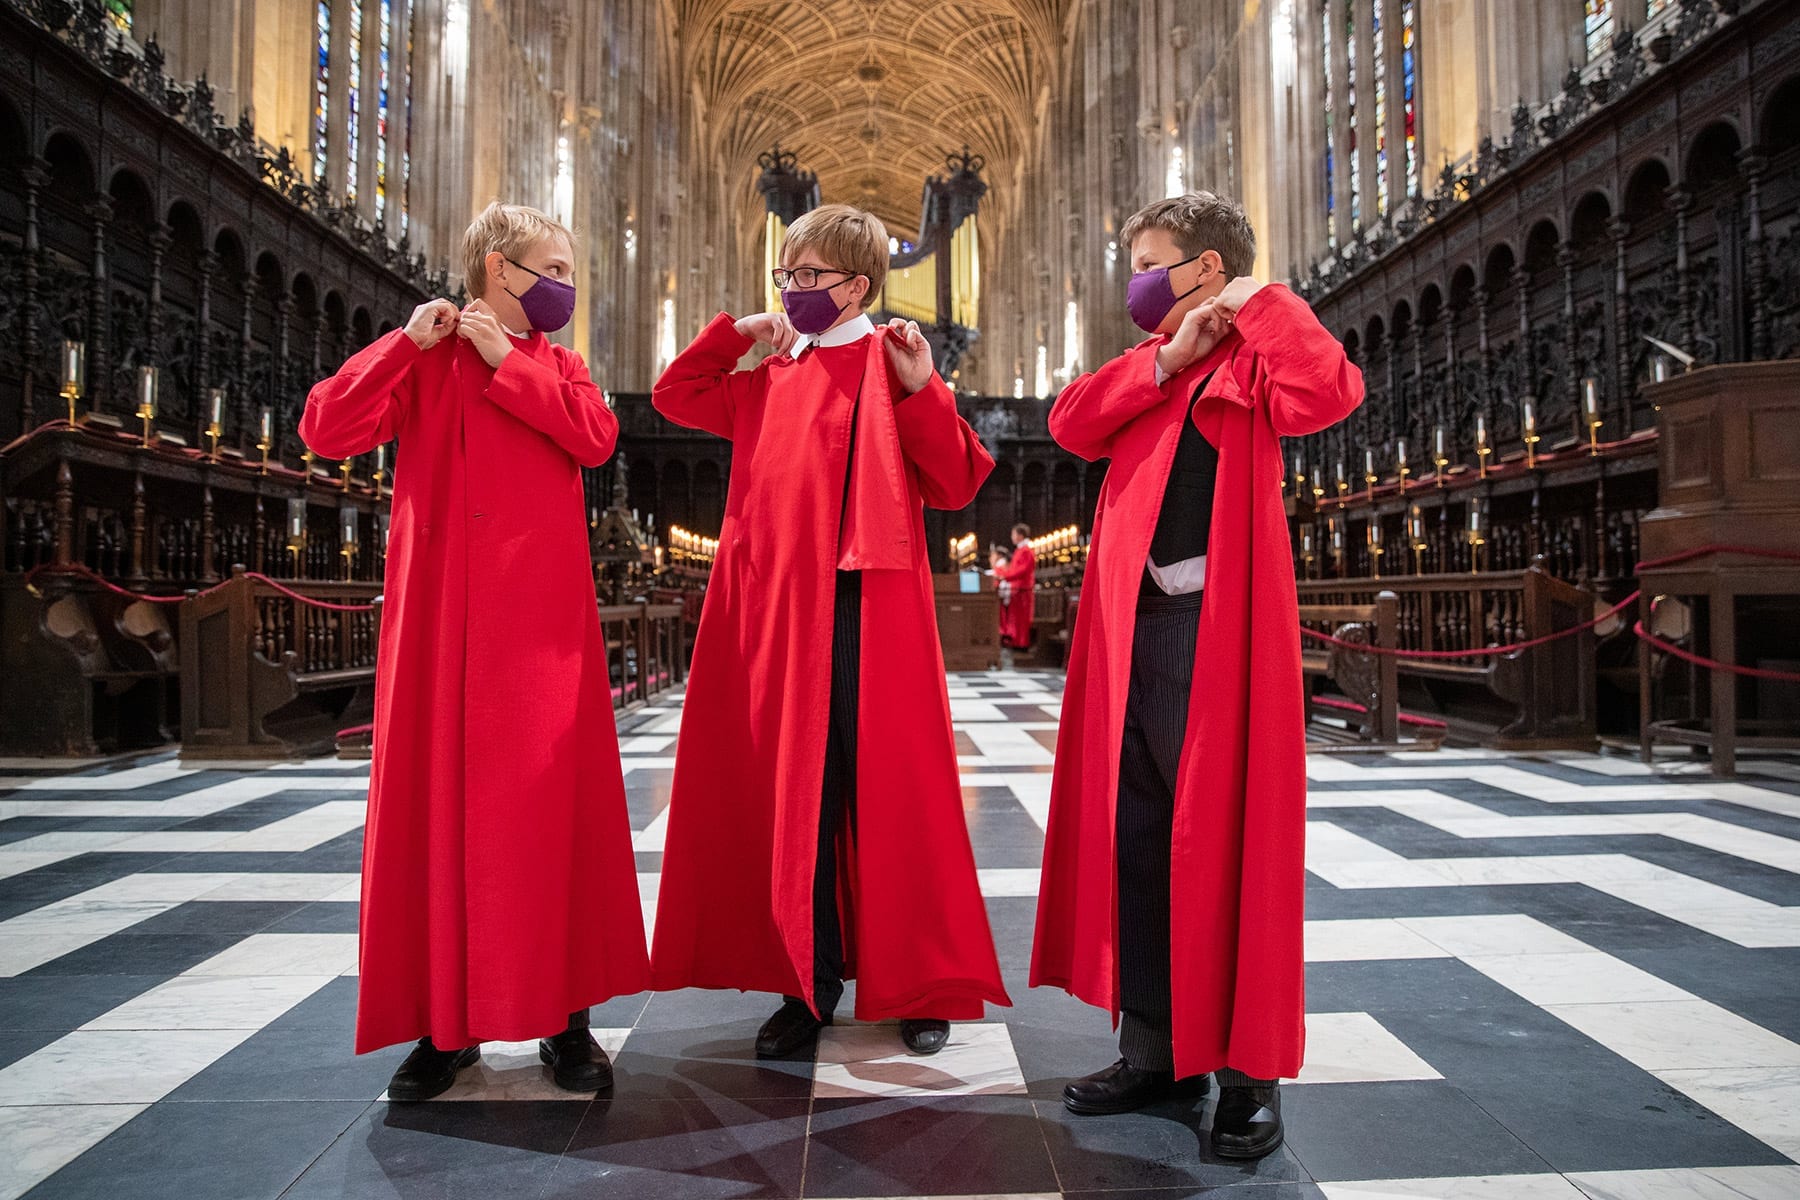 Choristers fitting their robes